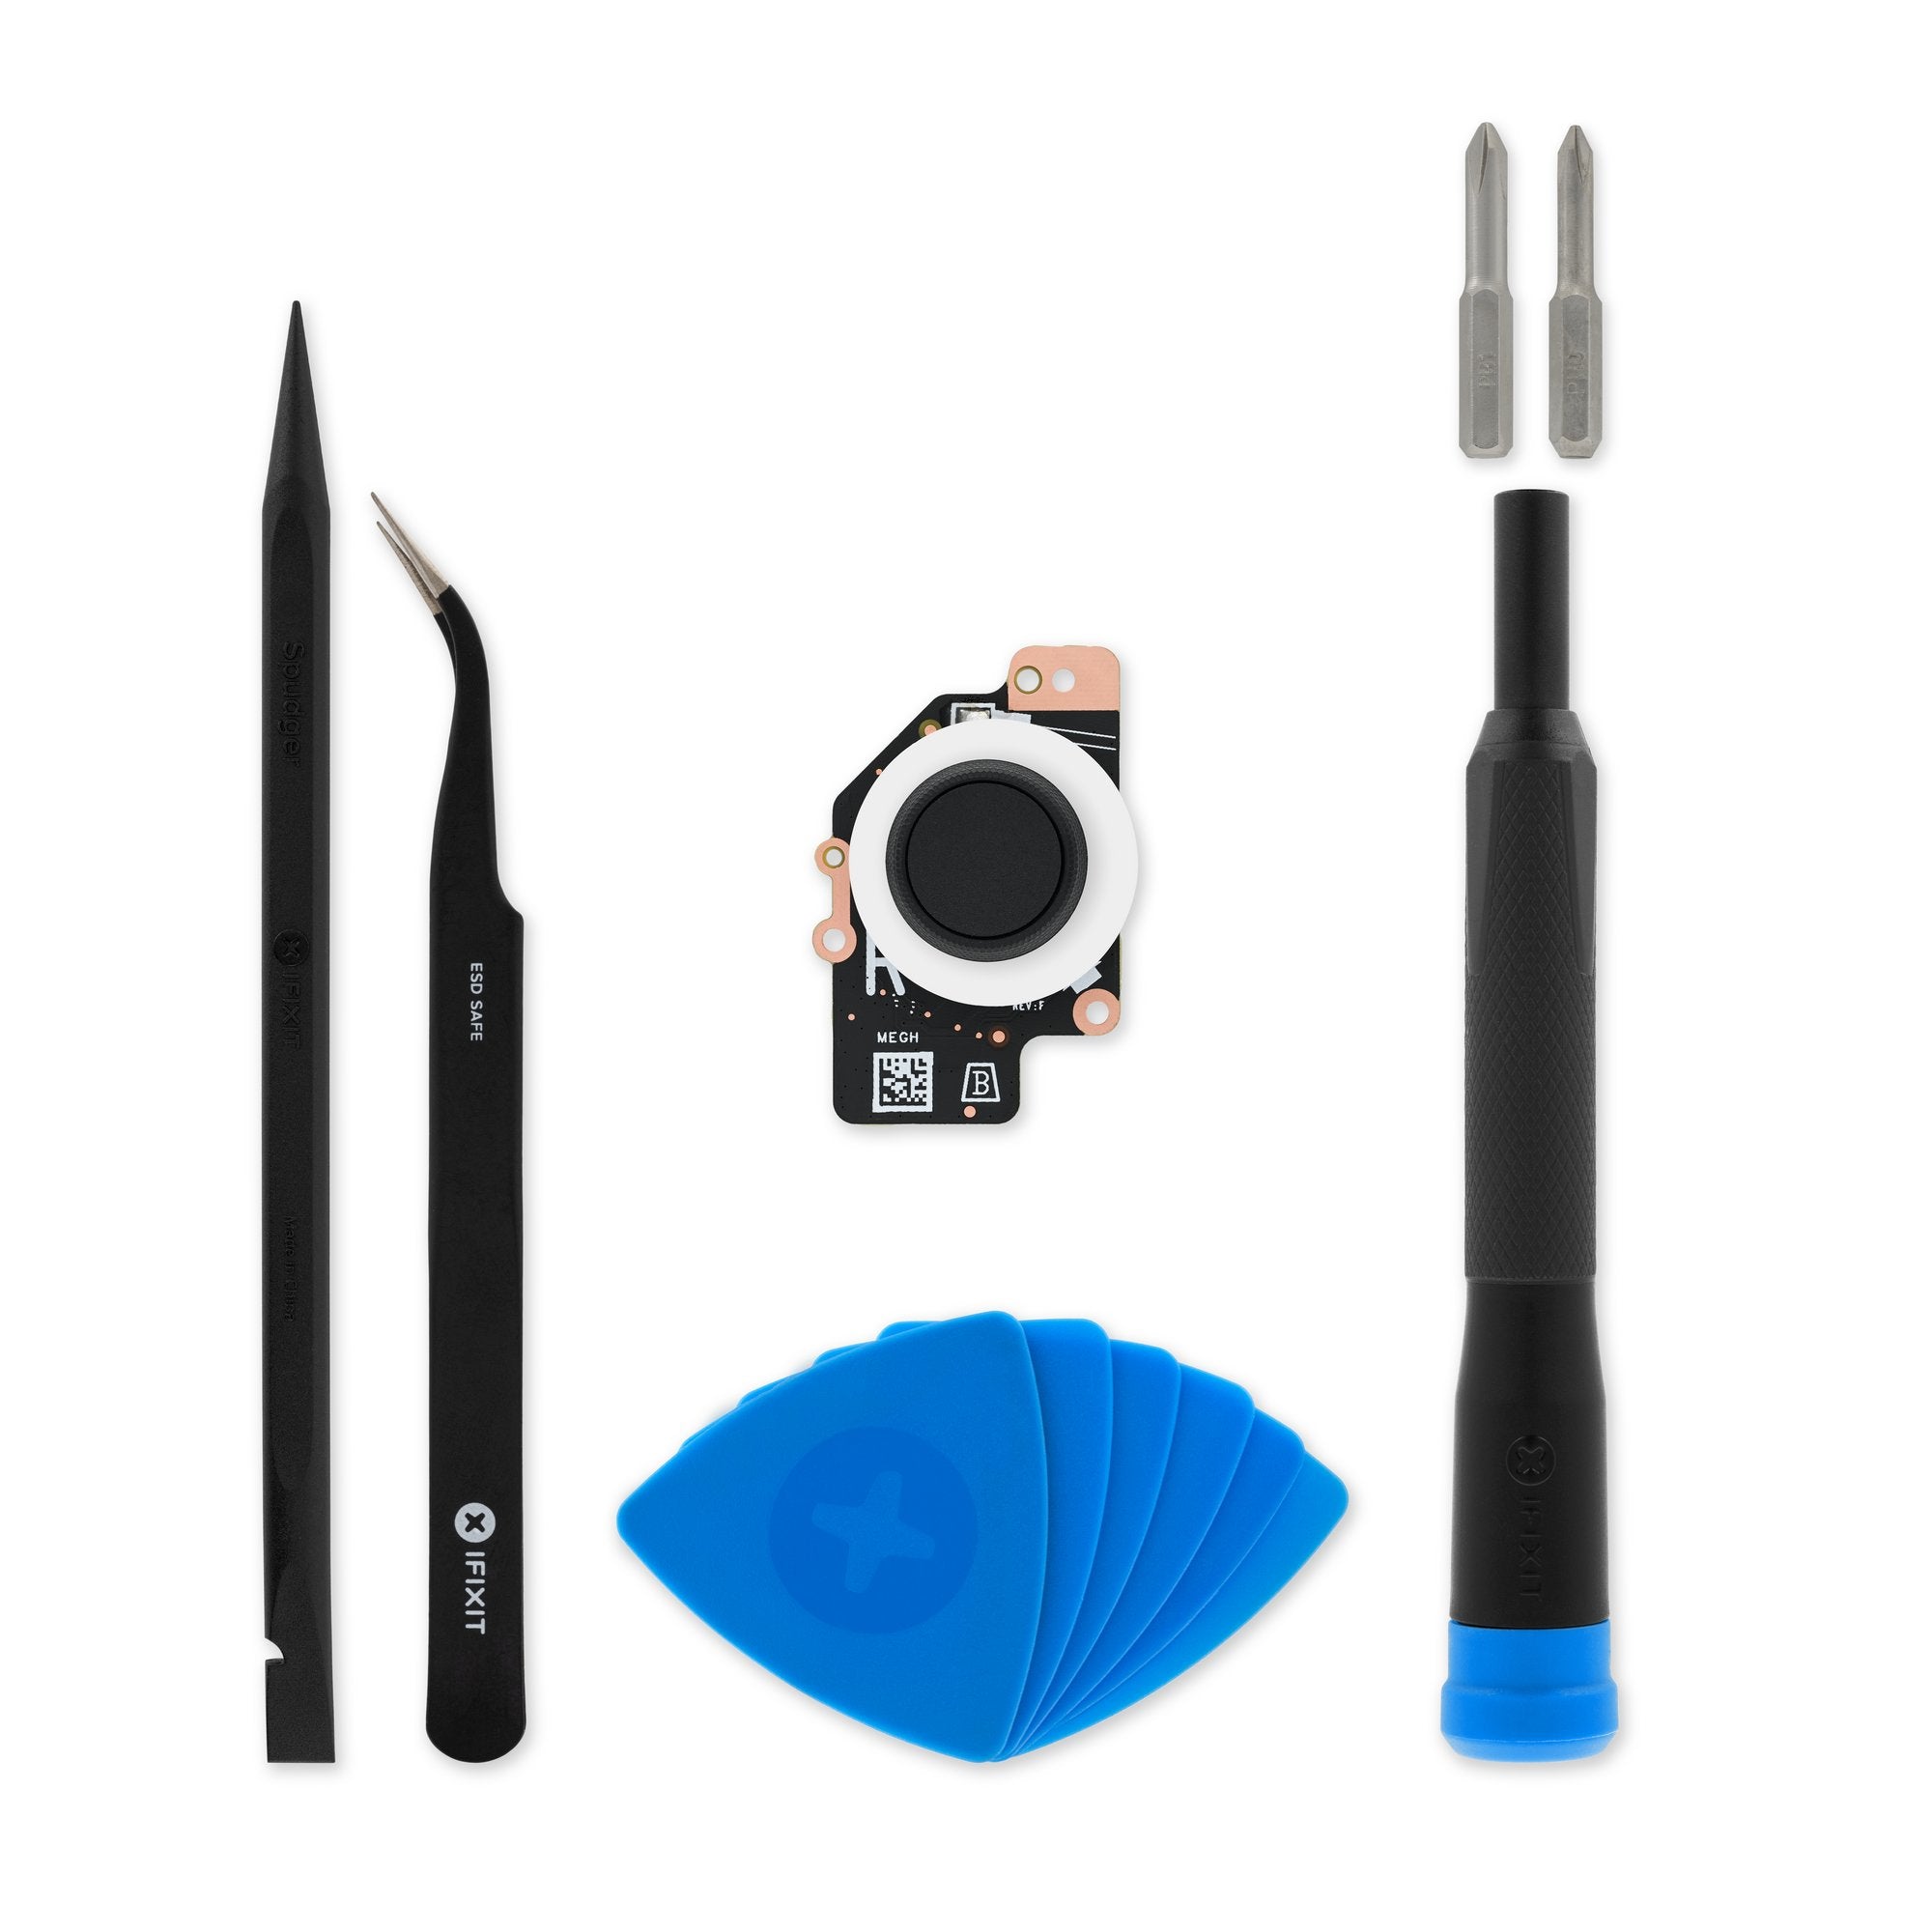 store.ifixit.fr